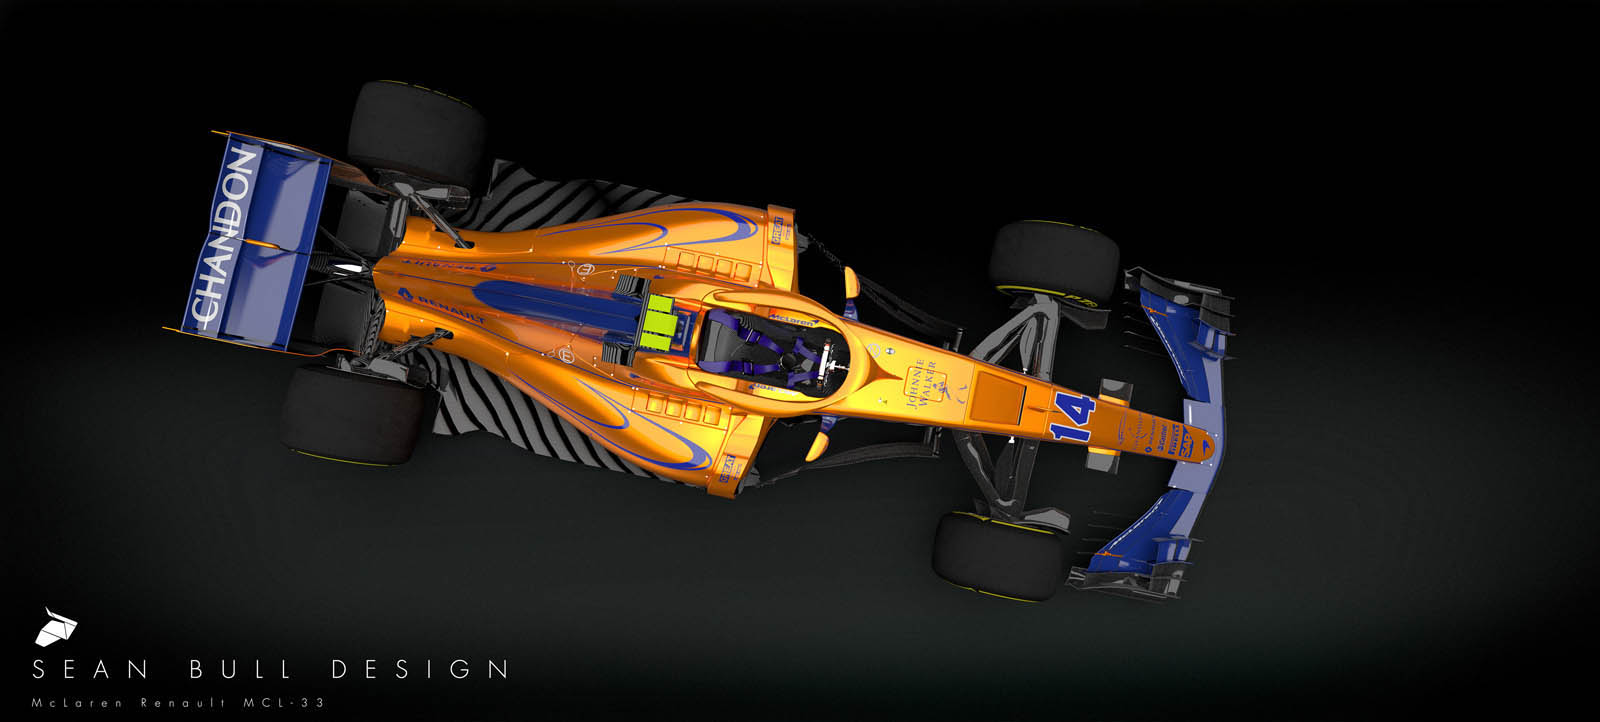 Maybe The Mclaren Renault Mcl33 Will Actually Win